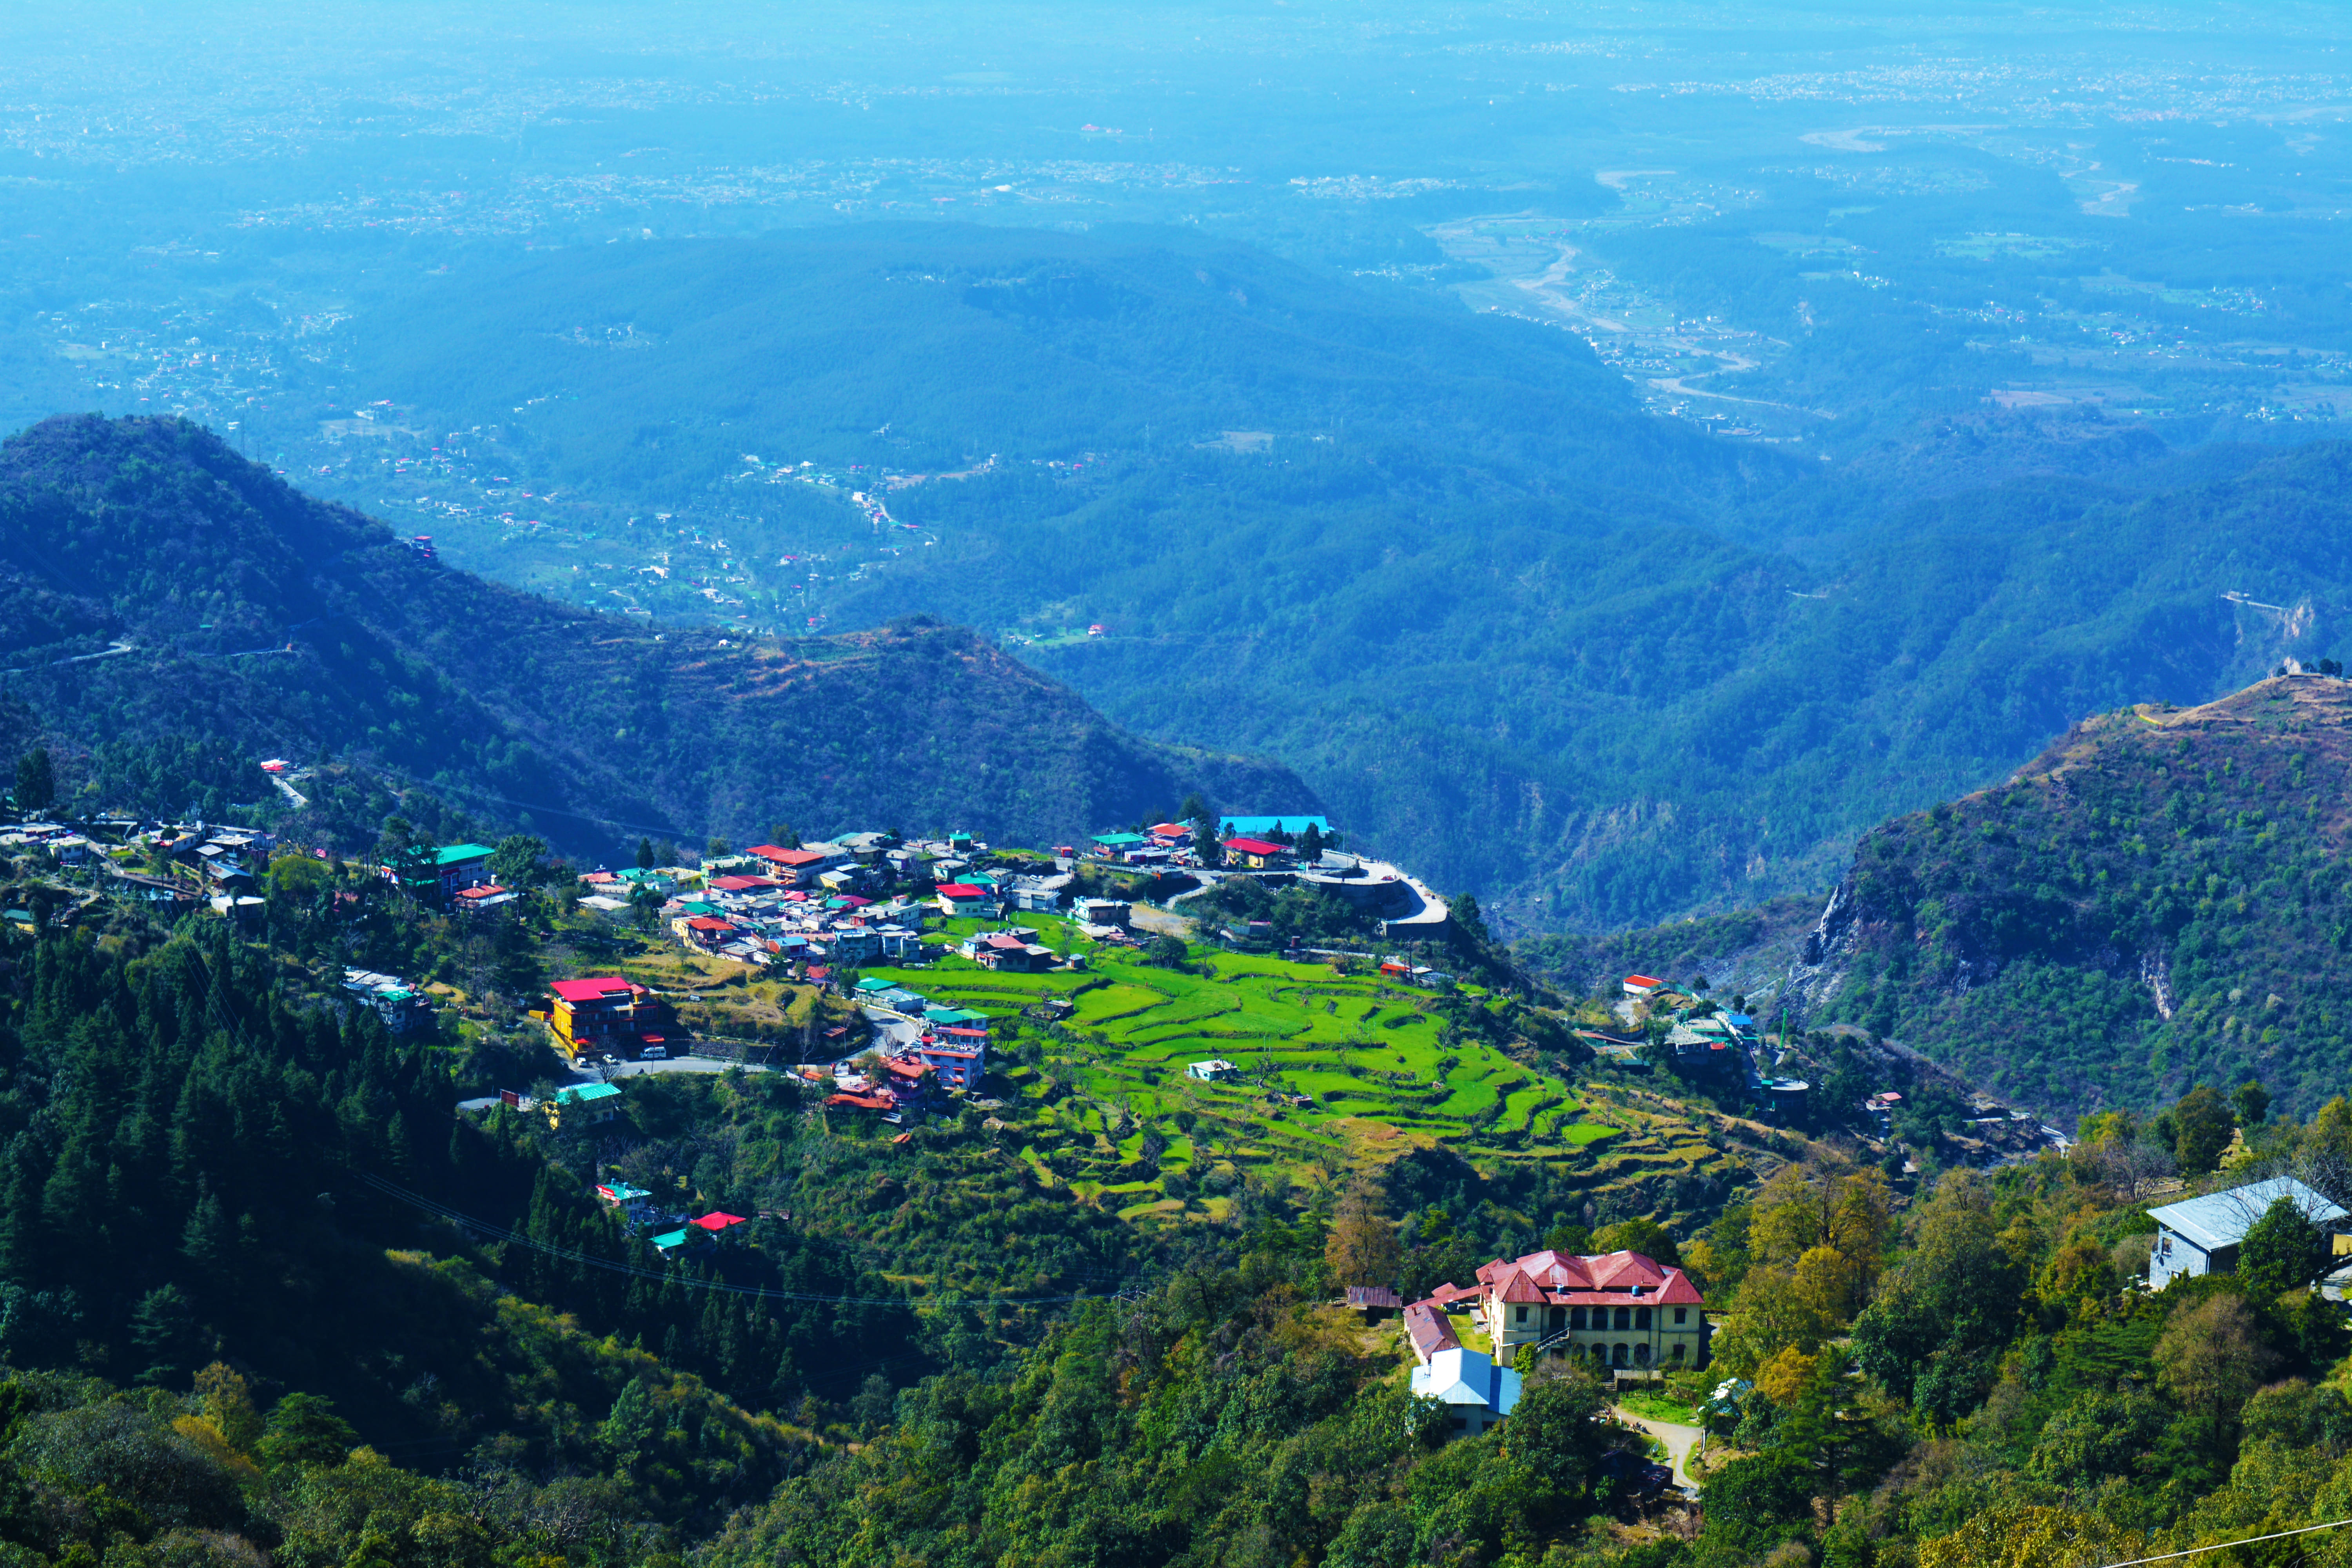 Visit the Queen of Hills and spend a relaxing time away from the busy cities